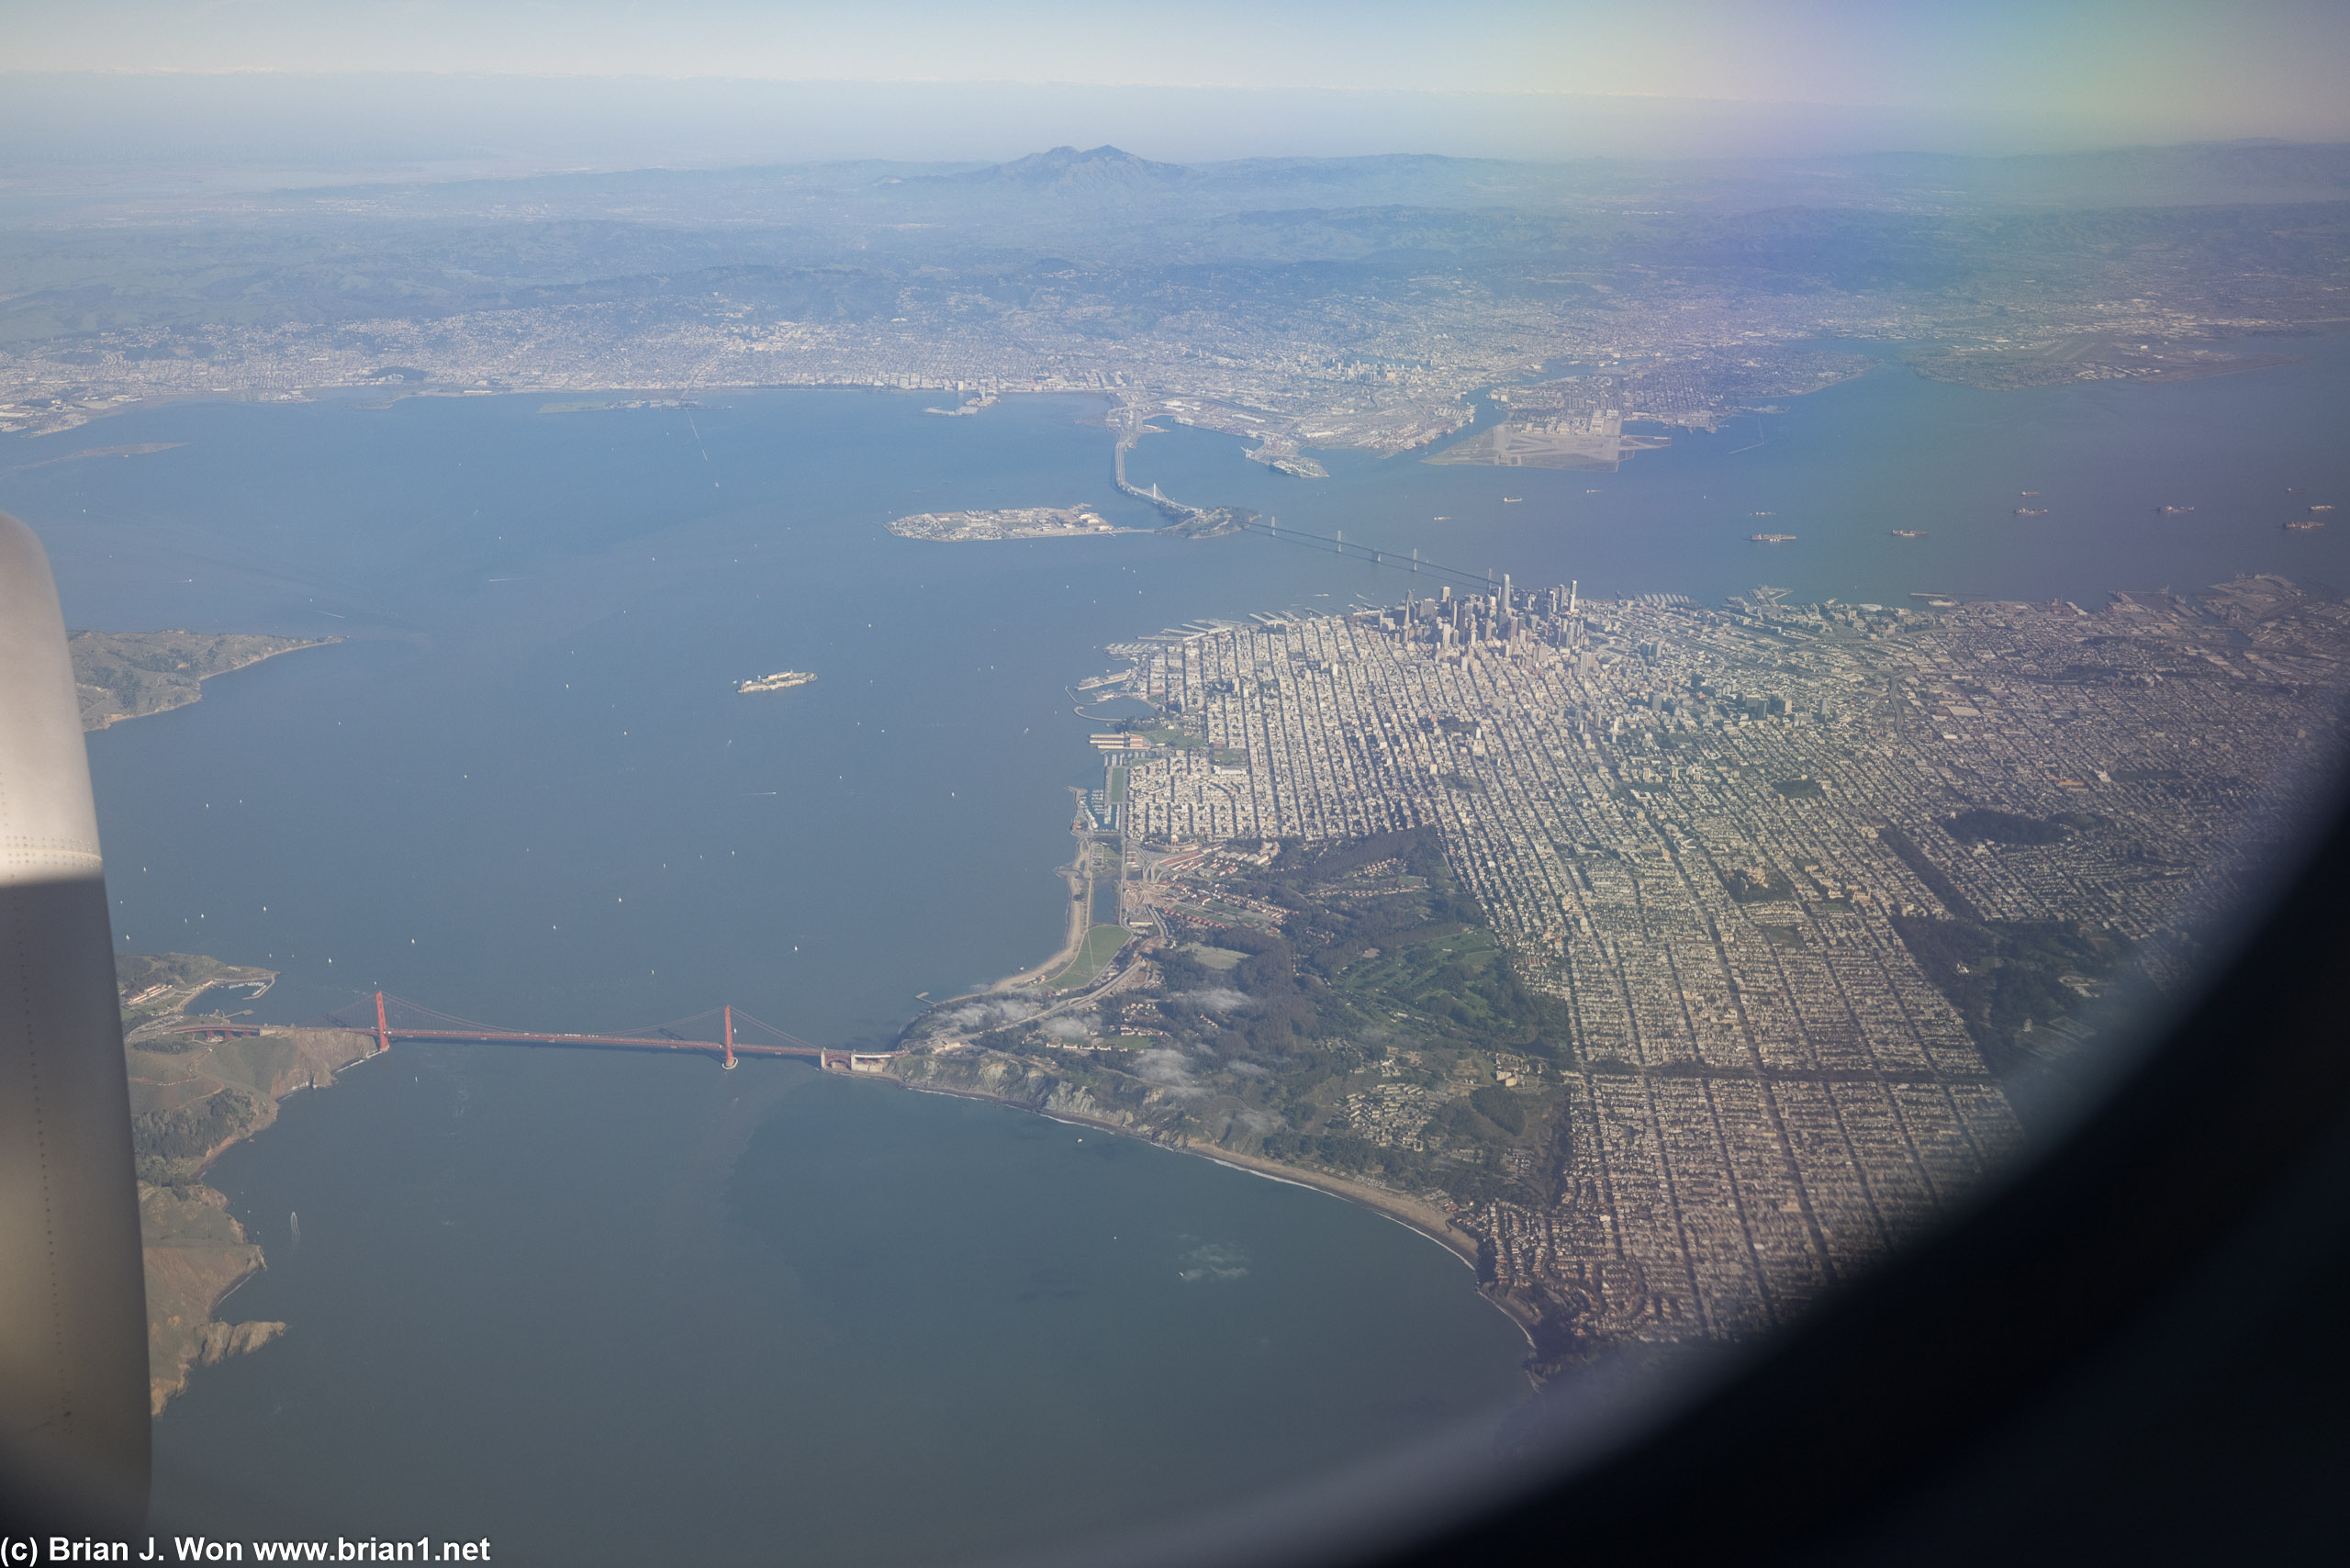 Soaring over San Francisco. Note all the container ships waiting to unload.